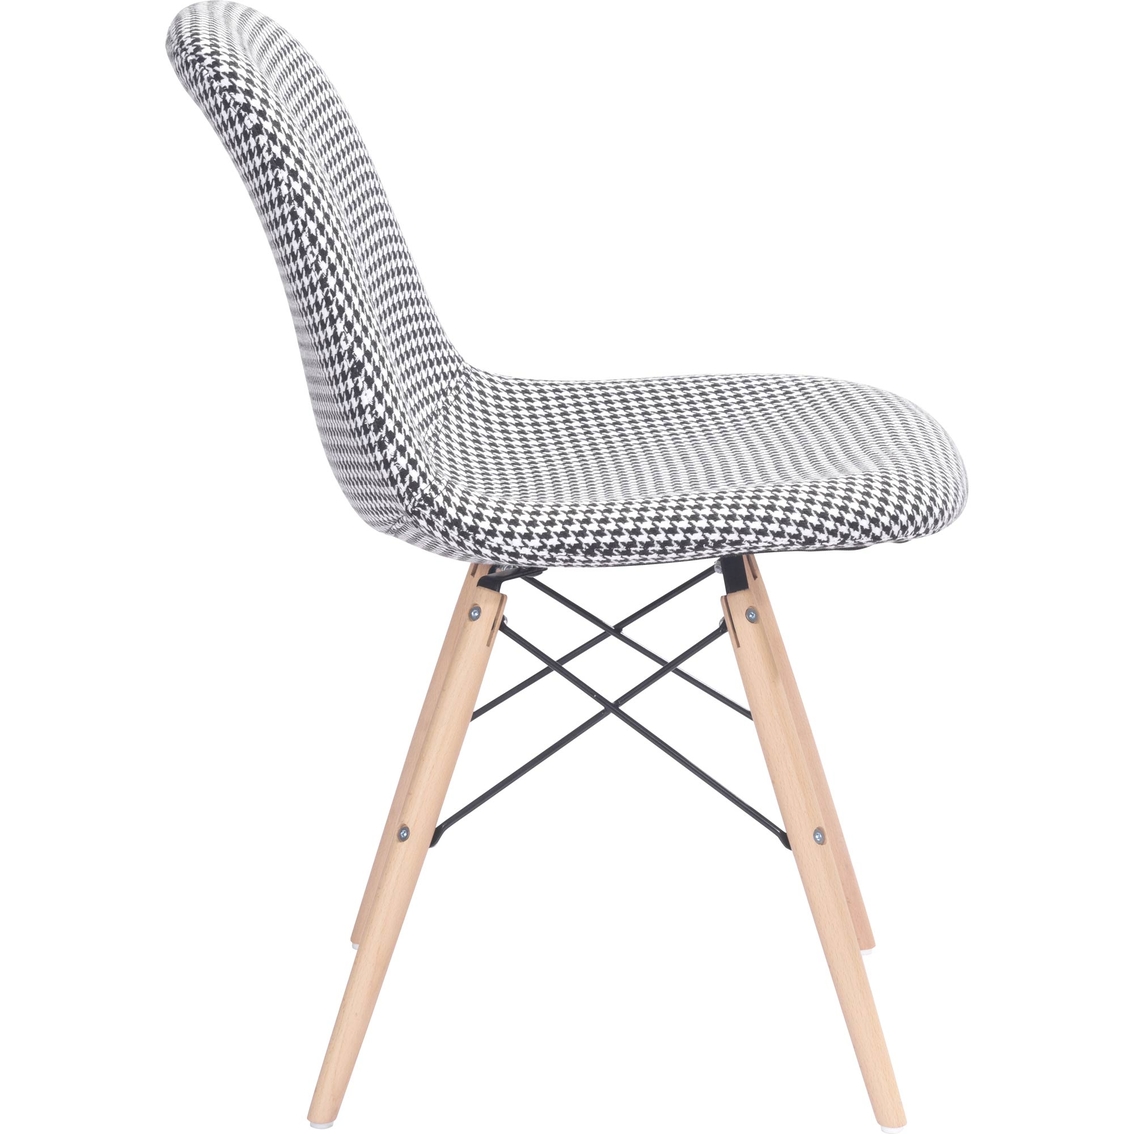 Zuo Modern Sappy Dining Chair Houndstooth - Image 2 of 4